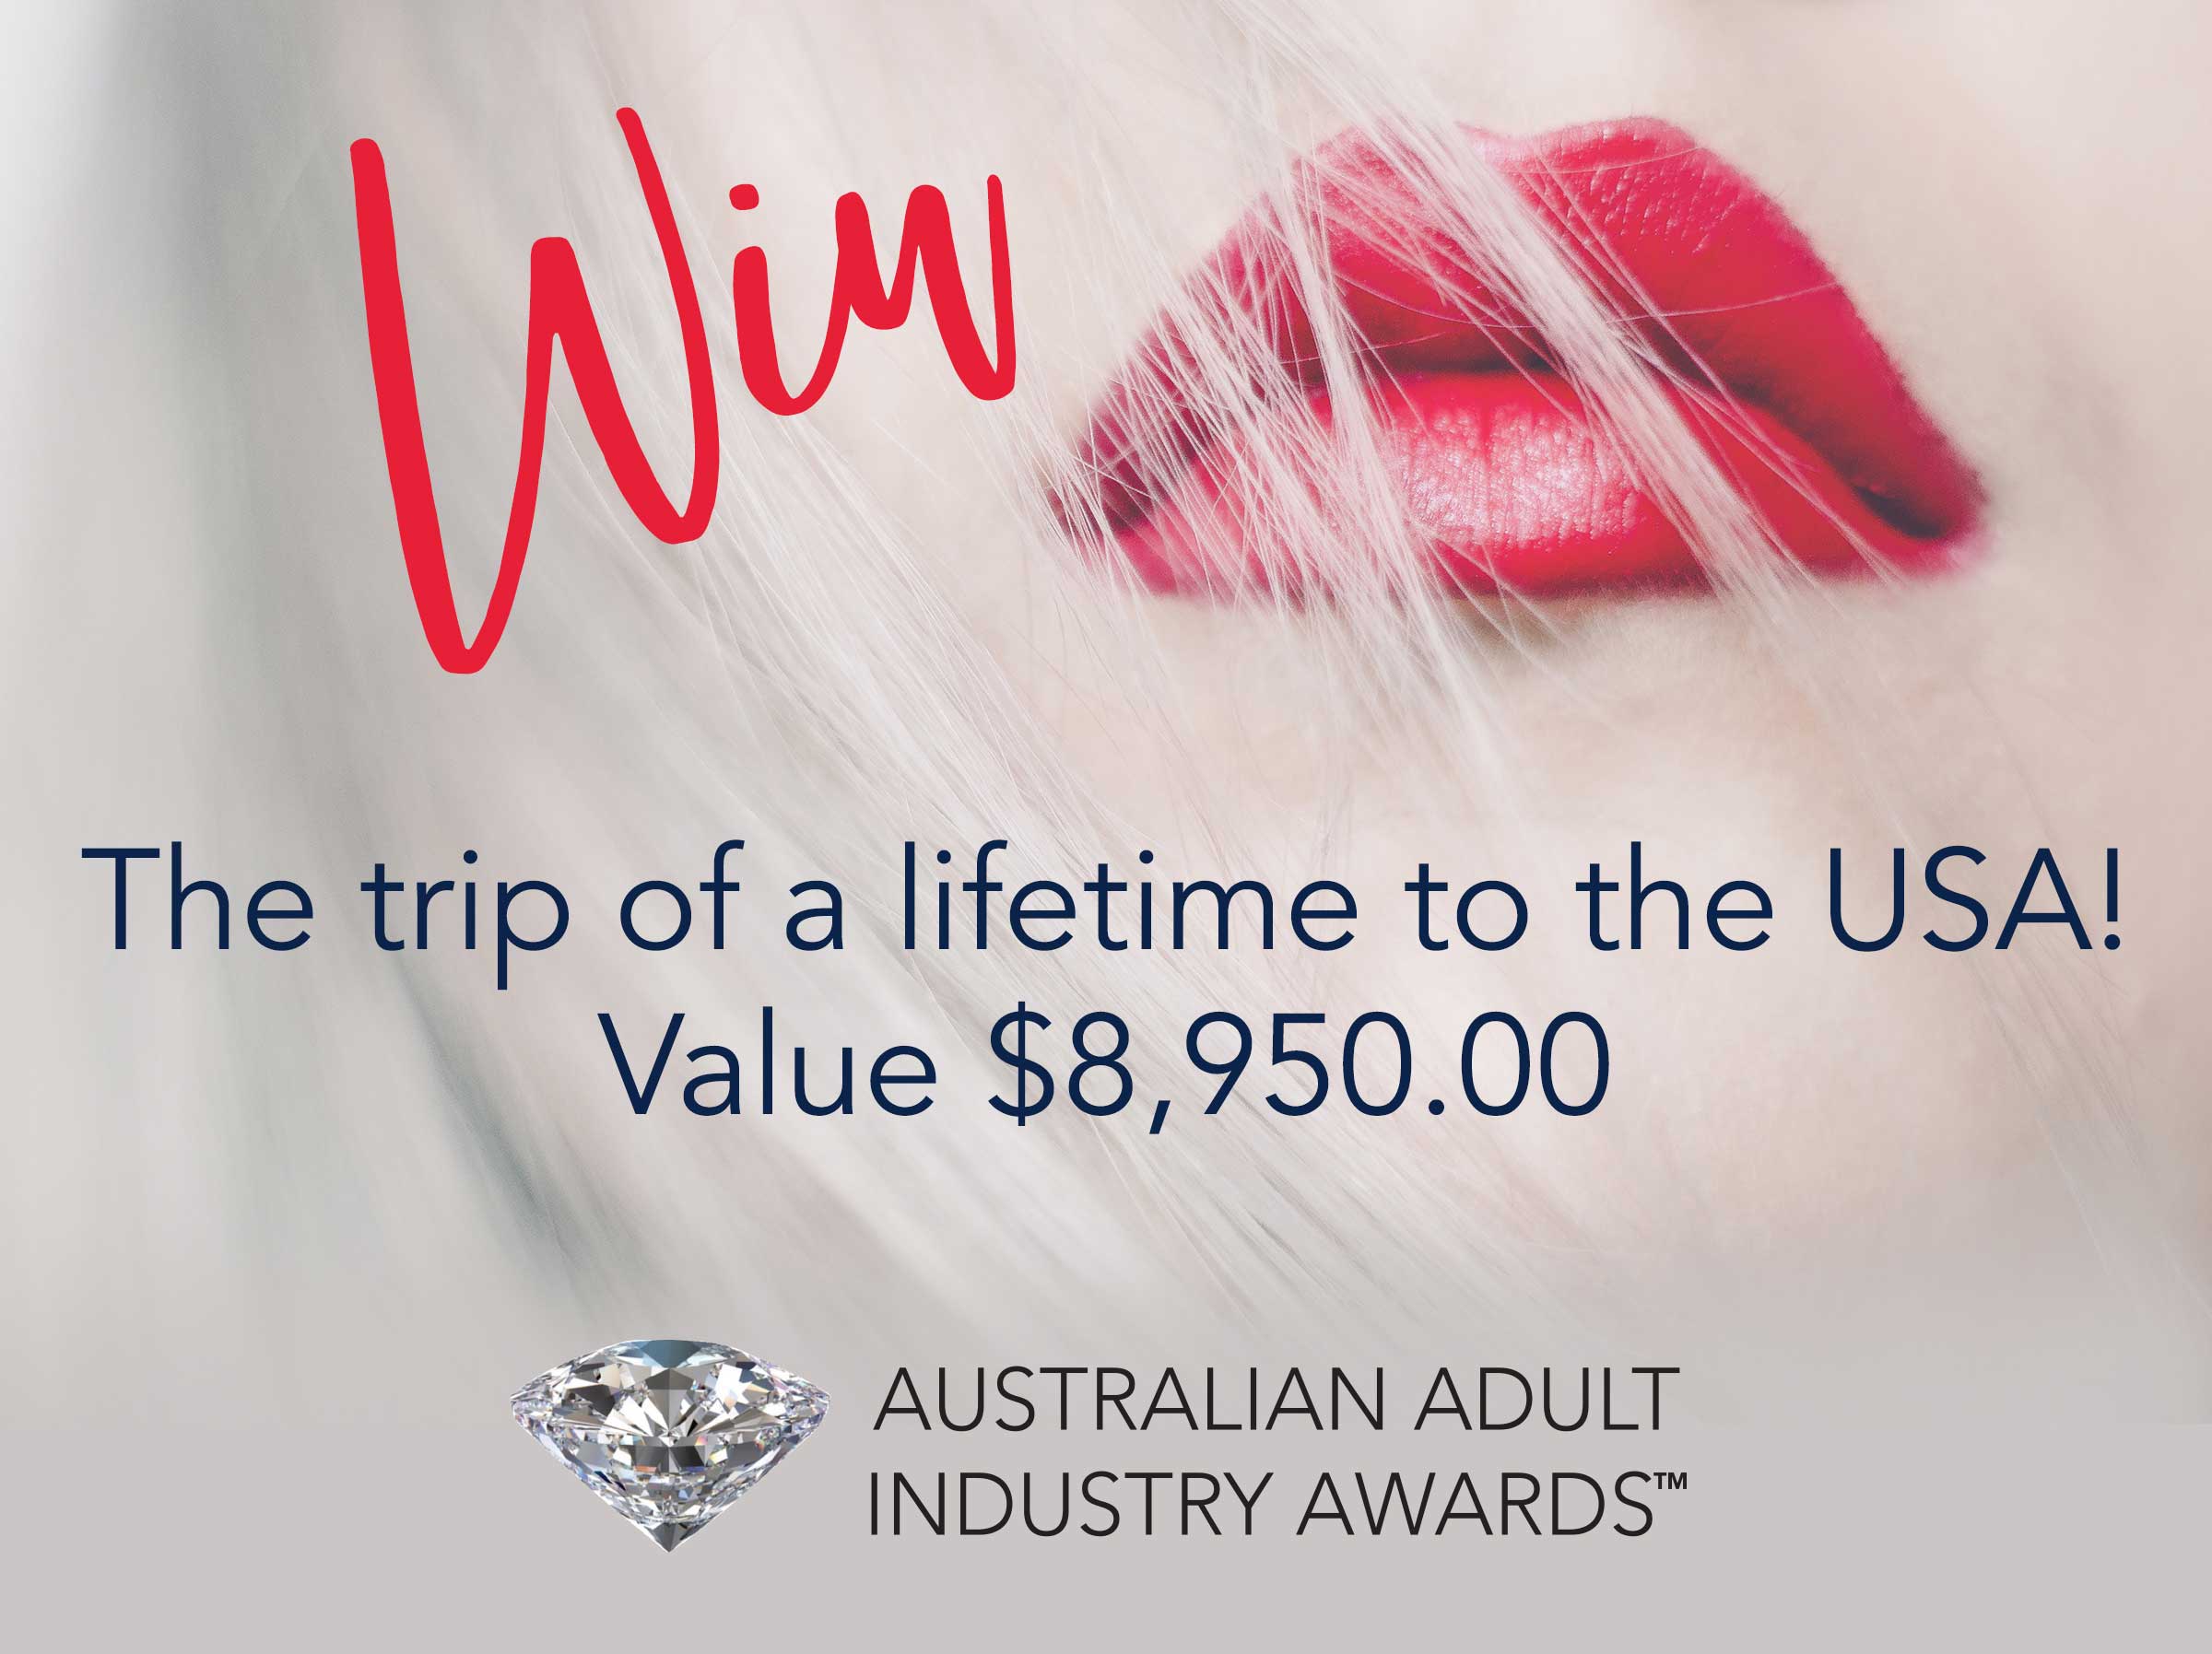 AAIA Australian Adult Industry Awards competition promo - Win the trip of a lifetime to the USA!